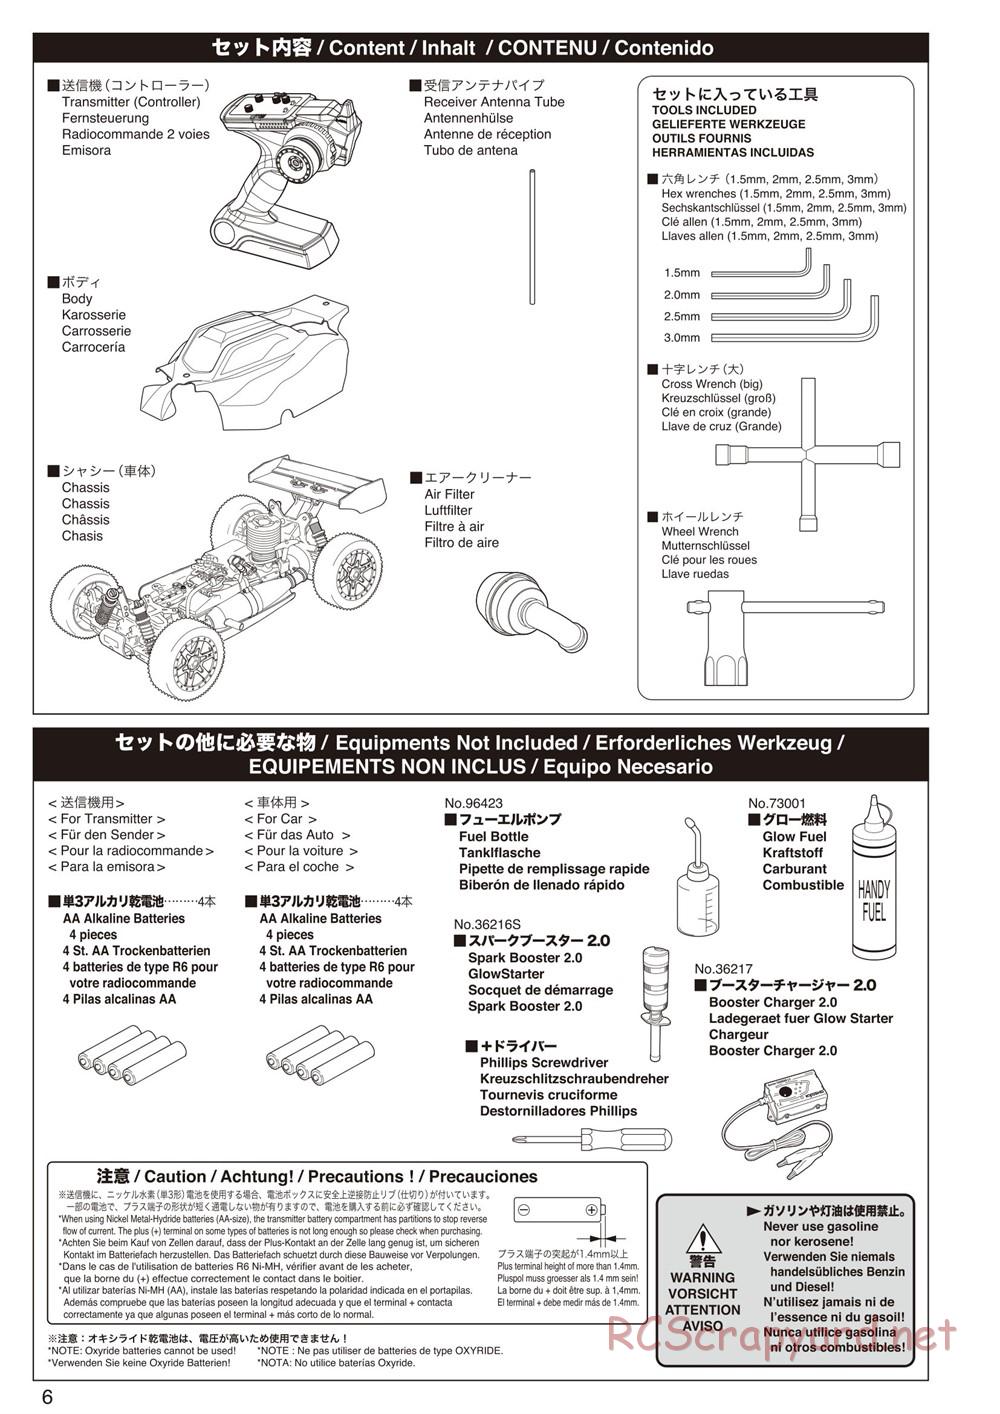 Kyosho - Inferno Neo 2.0 - Manual - Page 6